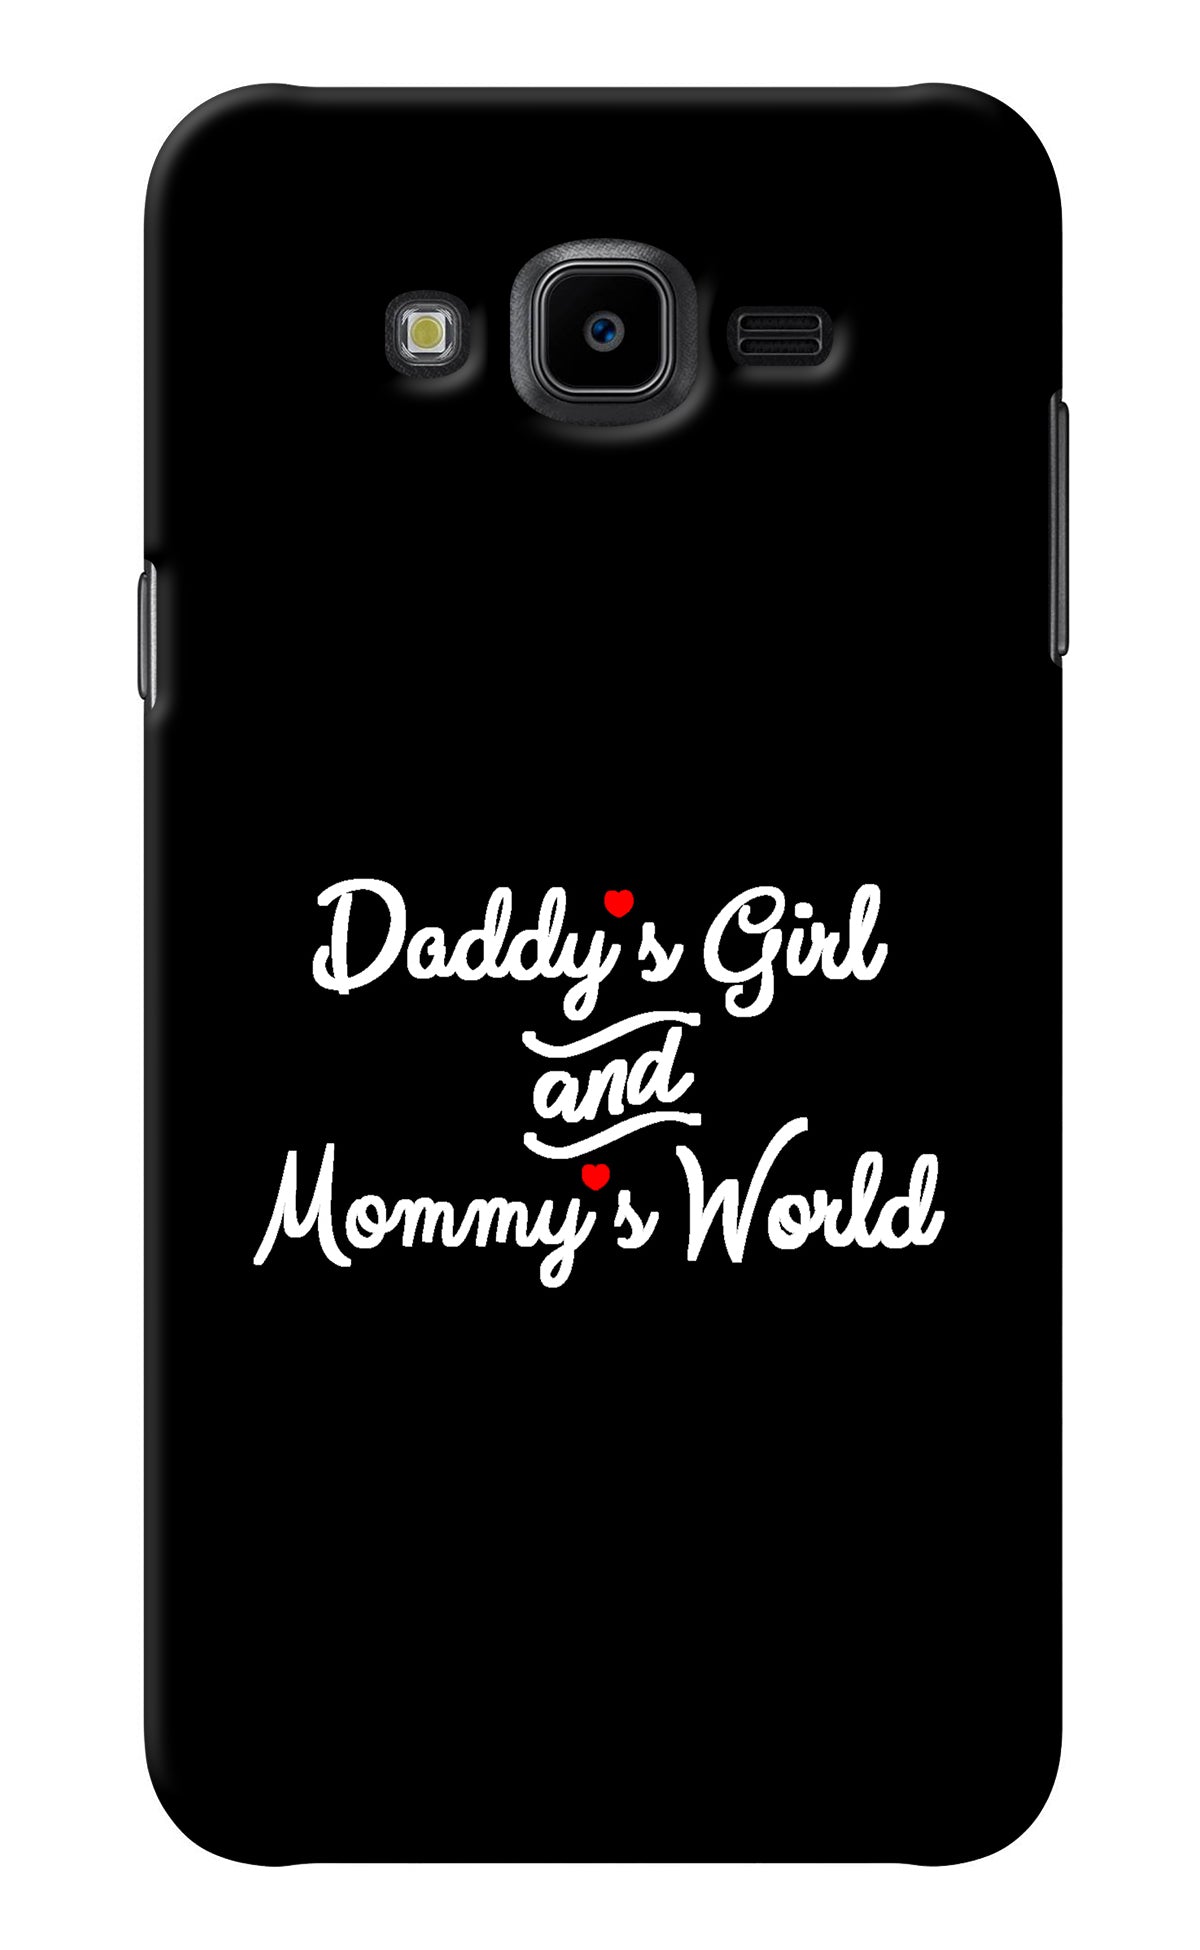 Daddy's Girl and Mommy's World Samsung J7 Nxt Back Cover